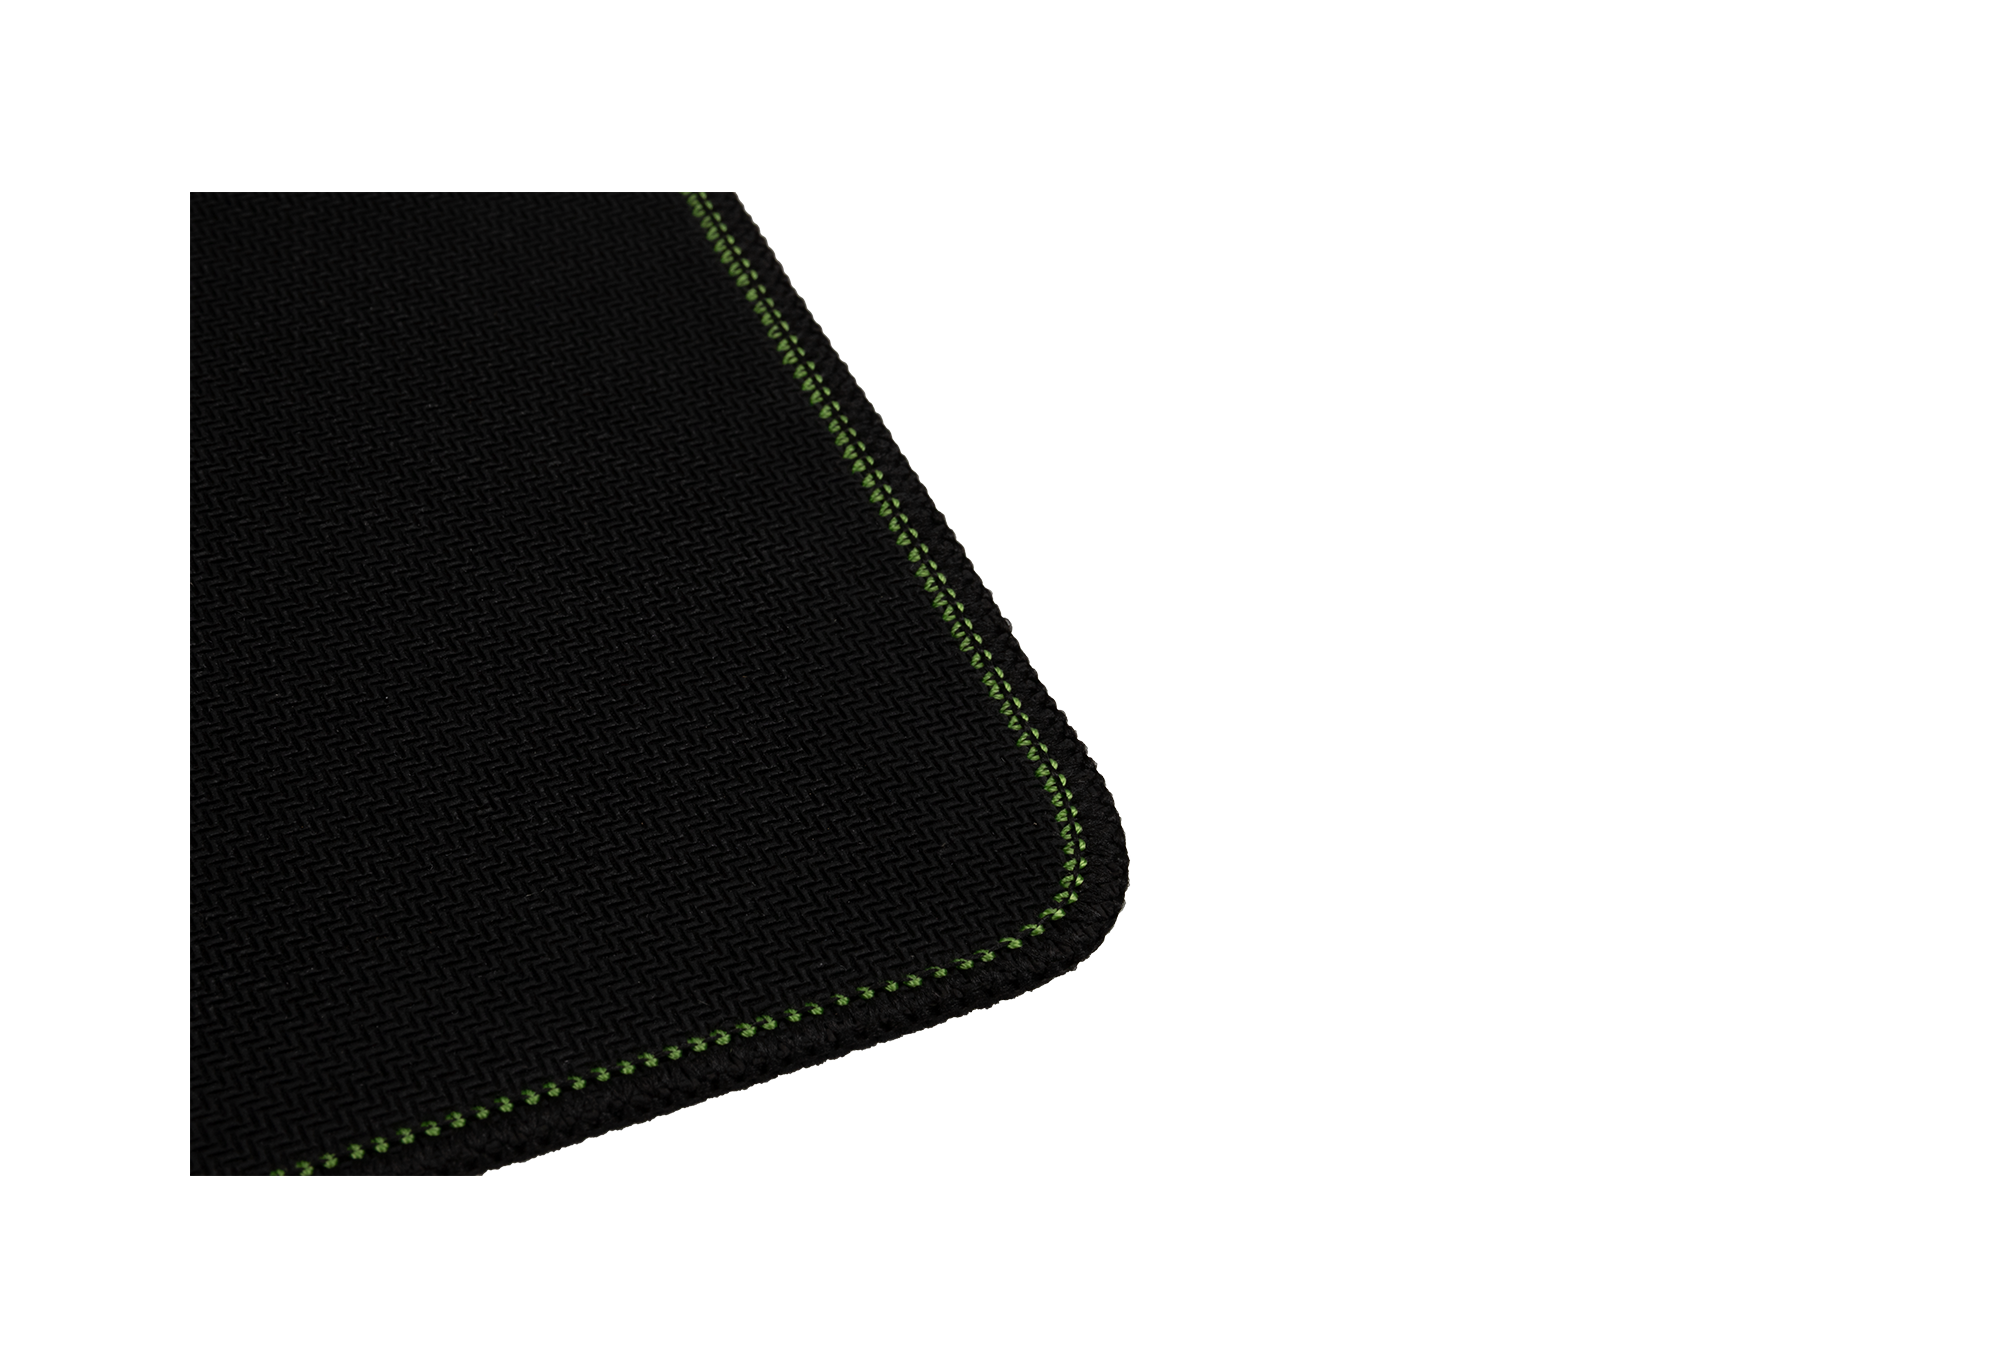 Endgamegear - MPJ450 Gaming Mousepad, SPROUT Edition